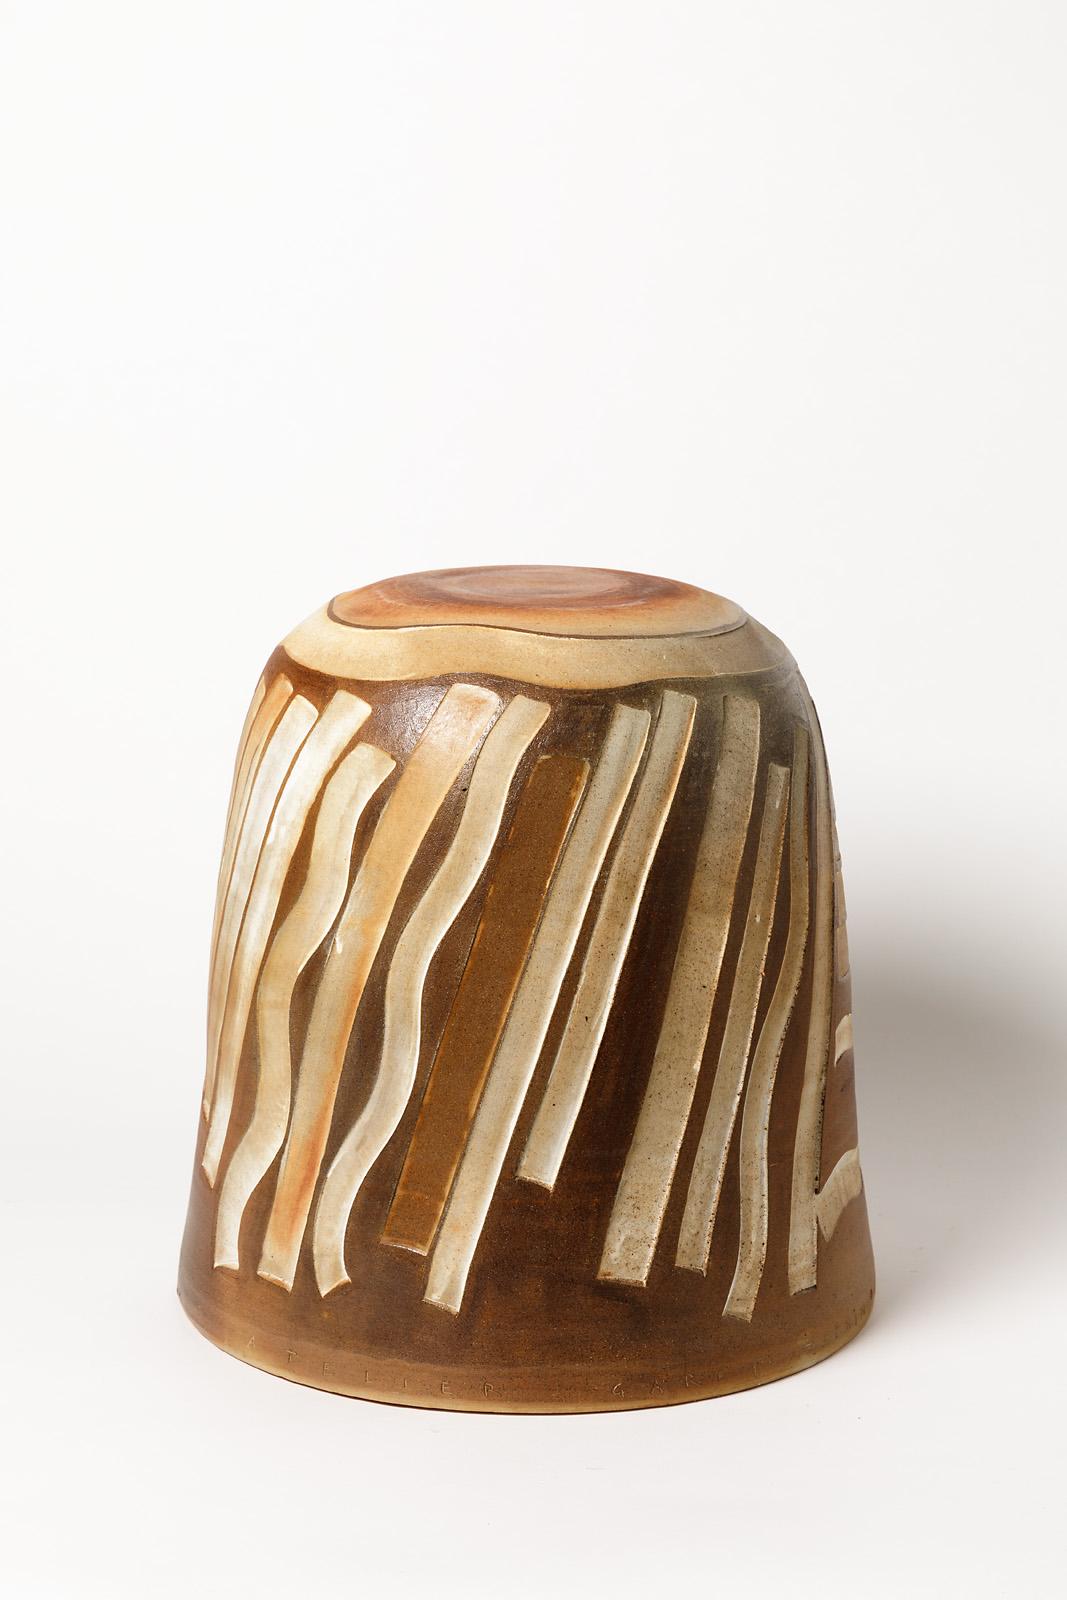 Contemporary Brown, Grey and White Stoneware Ceramic Stool by Roz Herrin Modern Design For Sale